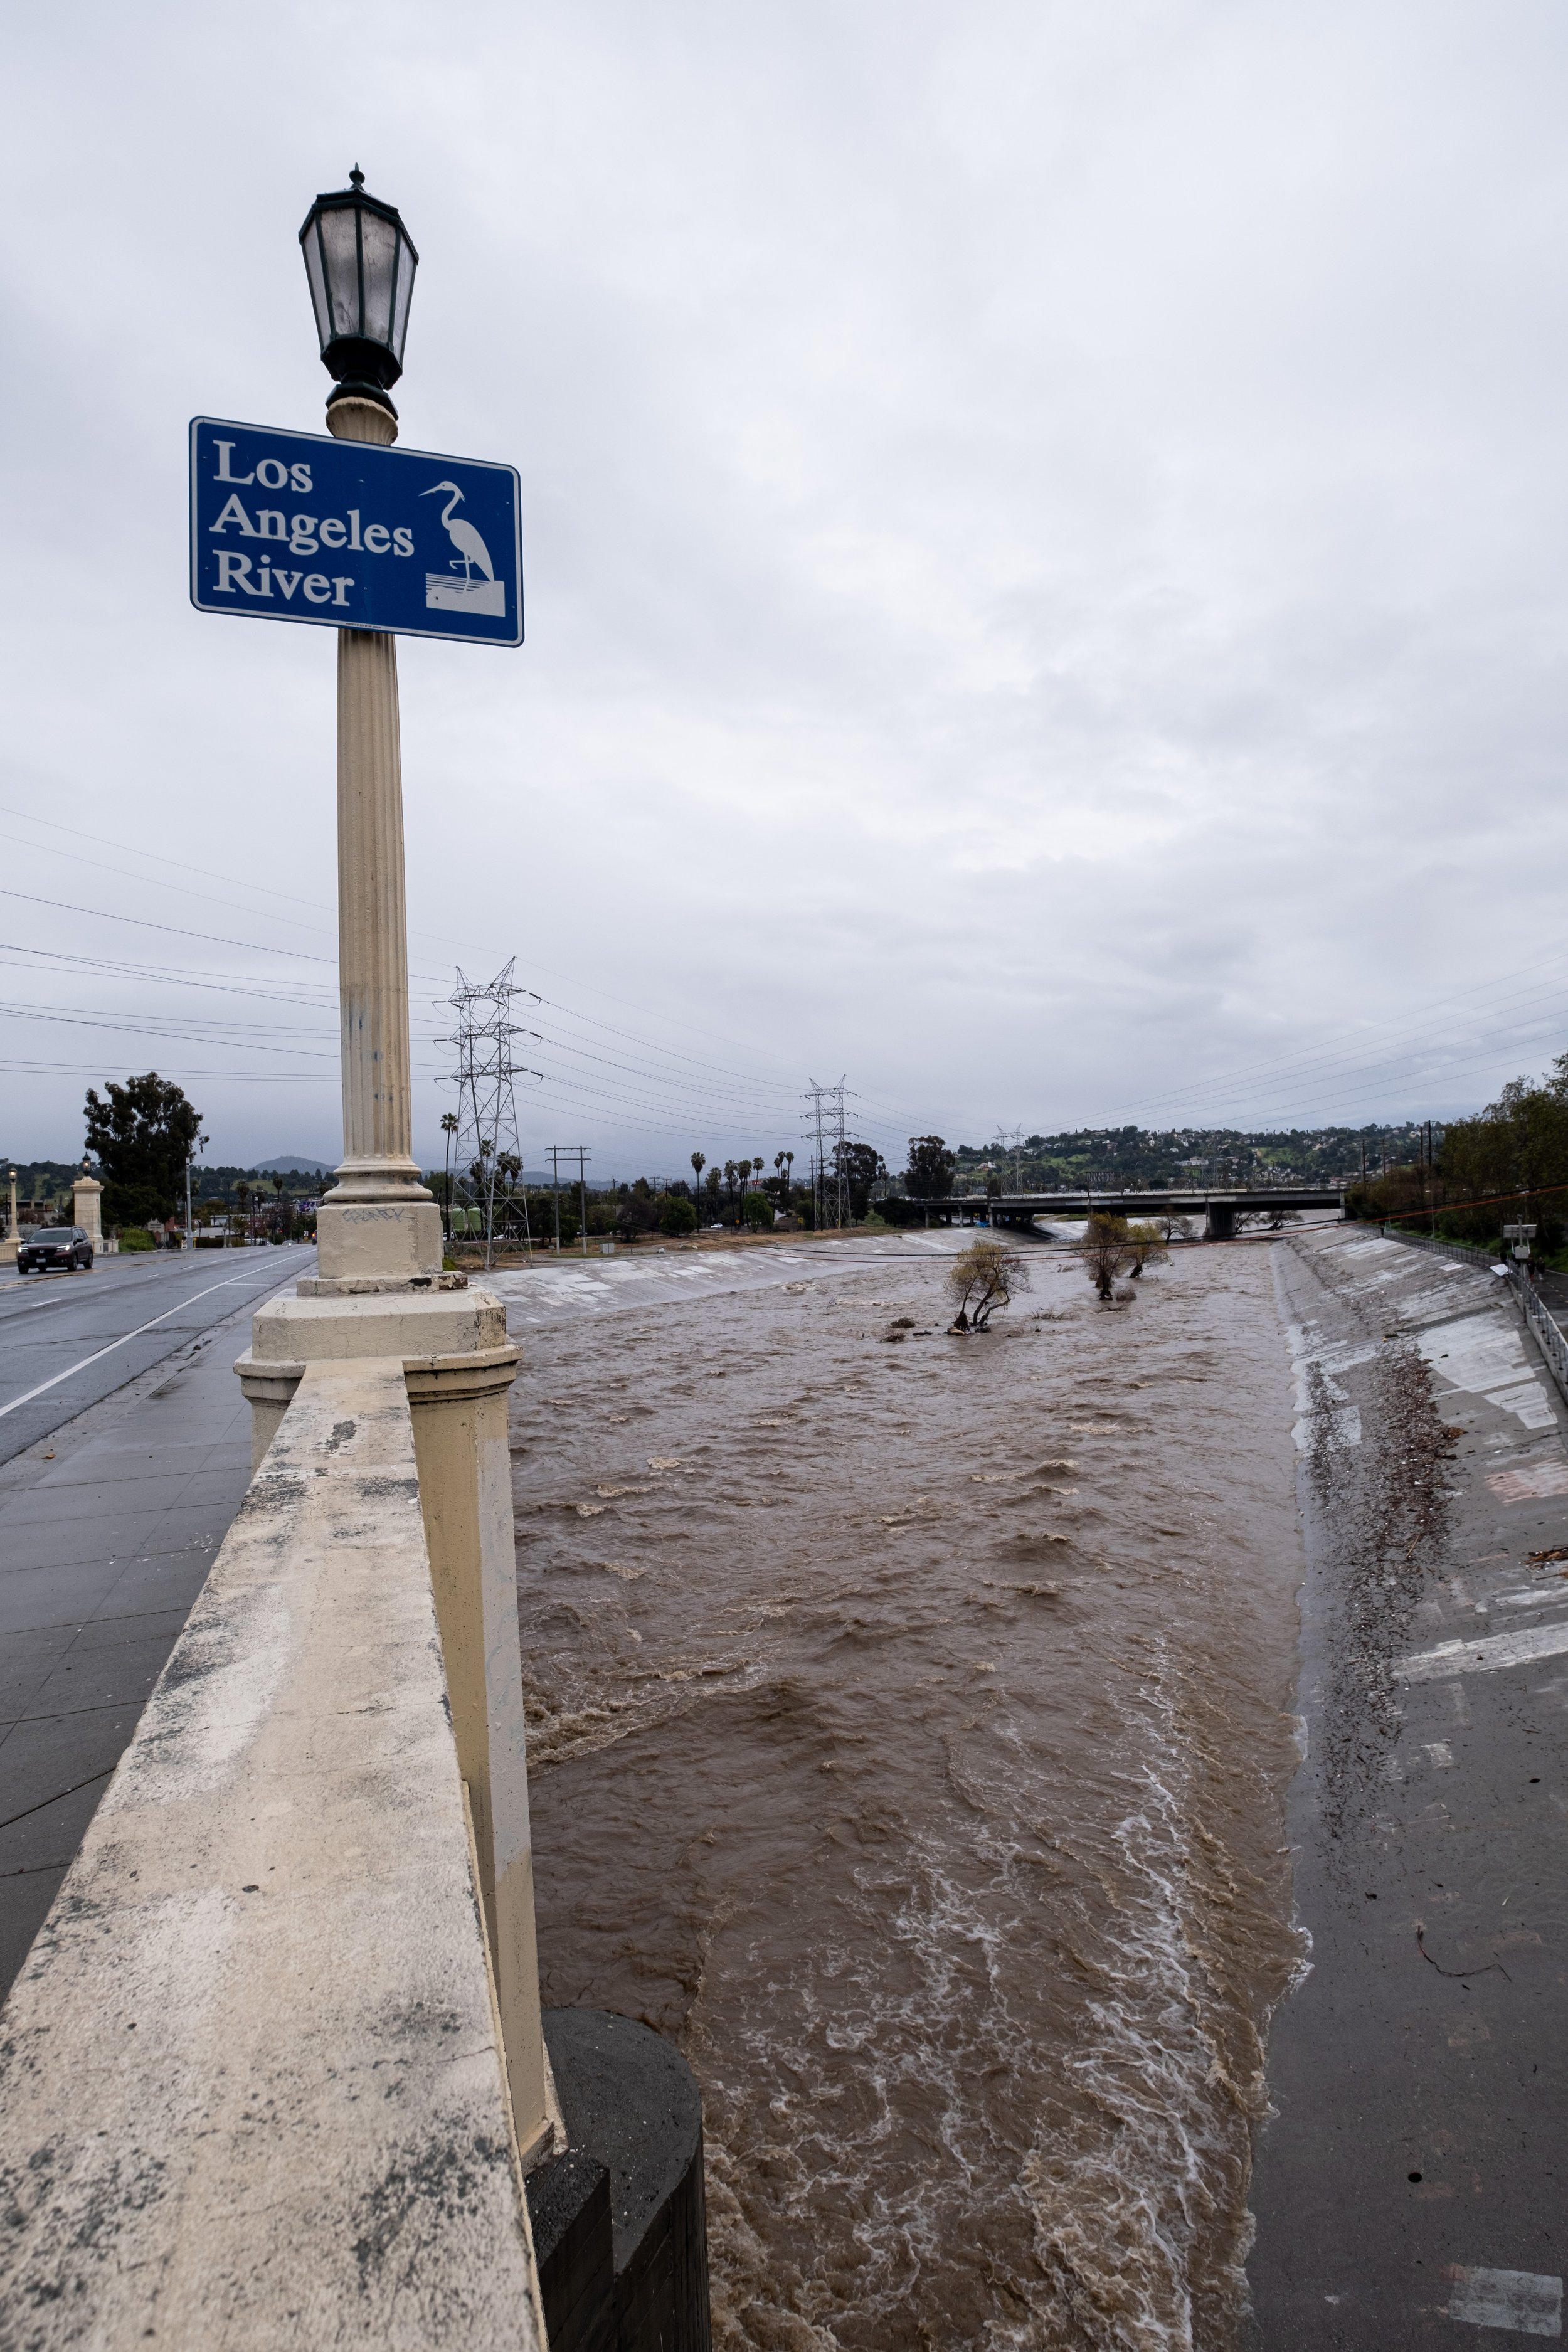  The Los Angeles River fills with water as heavy winter storms have poured down on the streets of Los Angeles, Calif. Seen from Fletcher Drive on Saturday February 25, 2023, the brown water surges through the concrete banks. (Akemi Rico | The Corsair